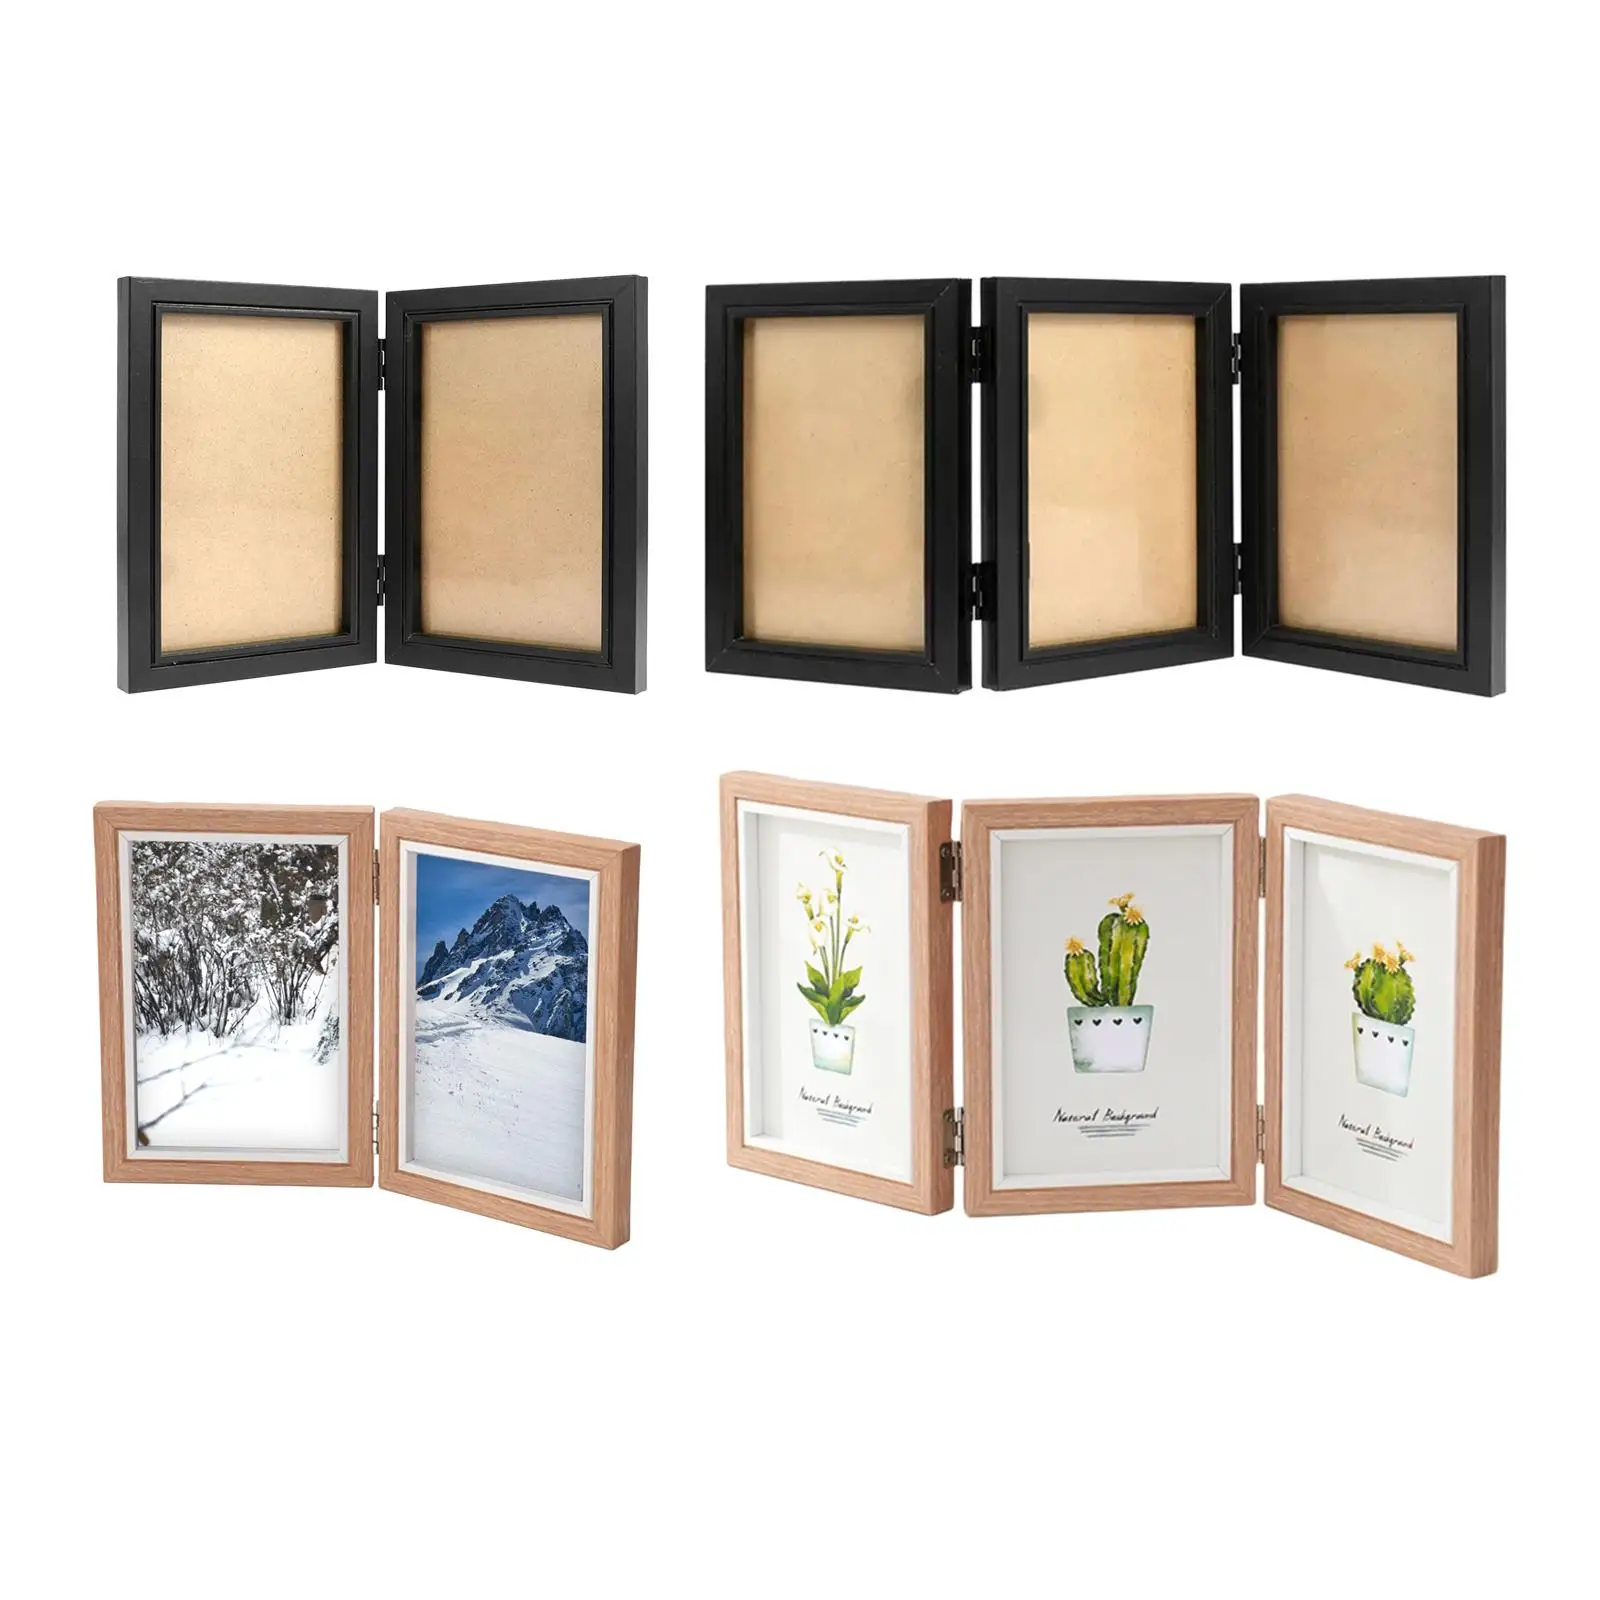 Elegant Photo Frame 4x6 Vertical Picture Holder for Home Decor And Gifts